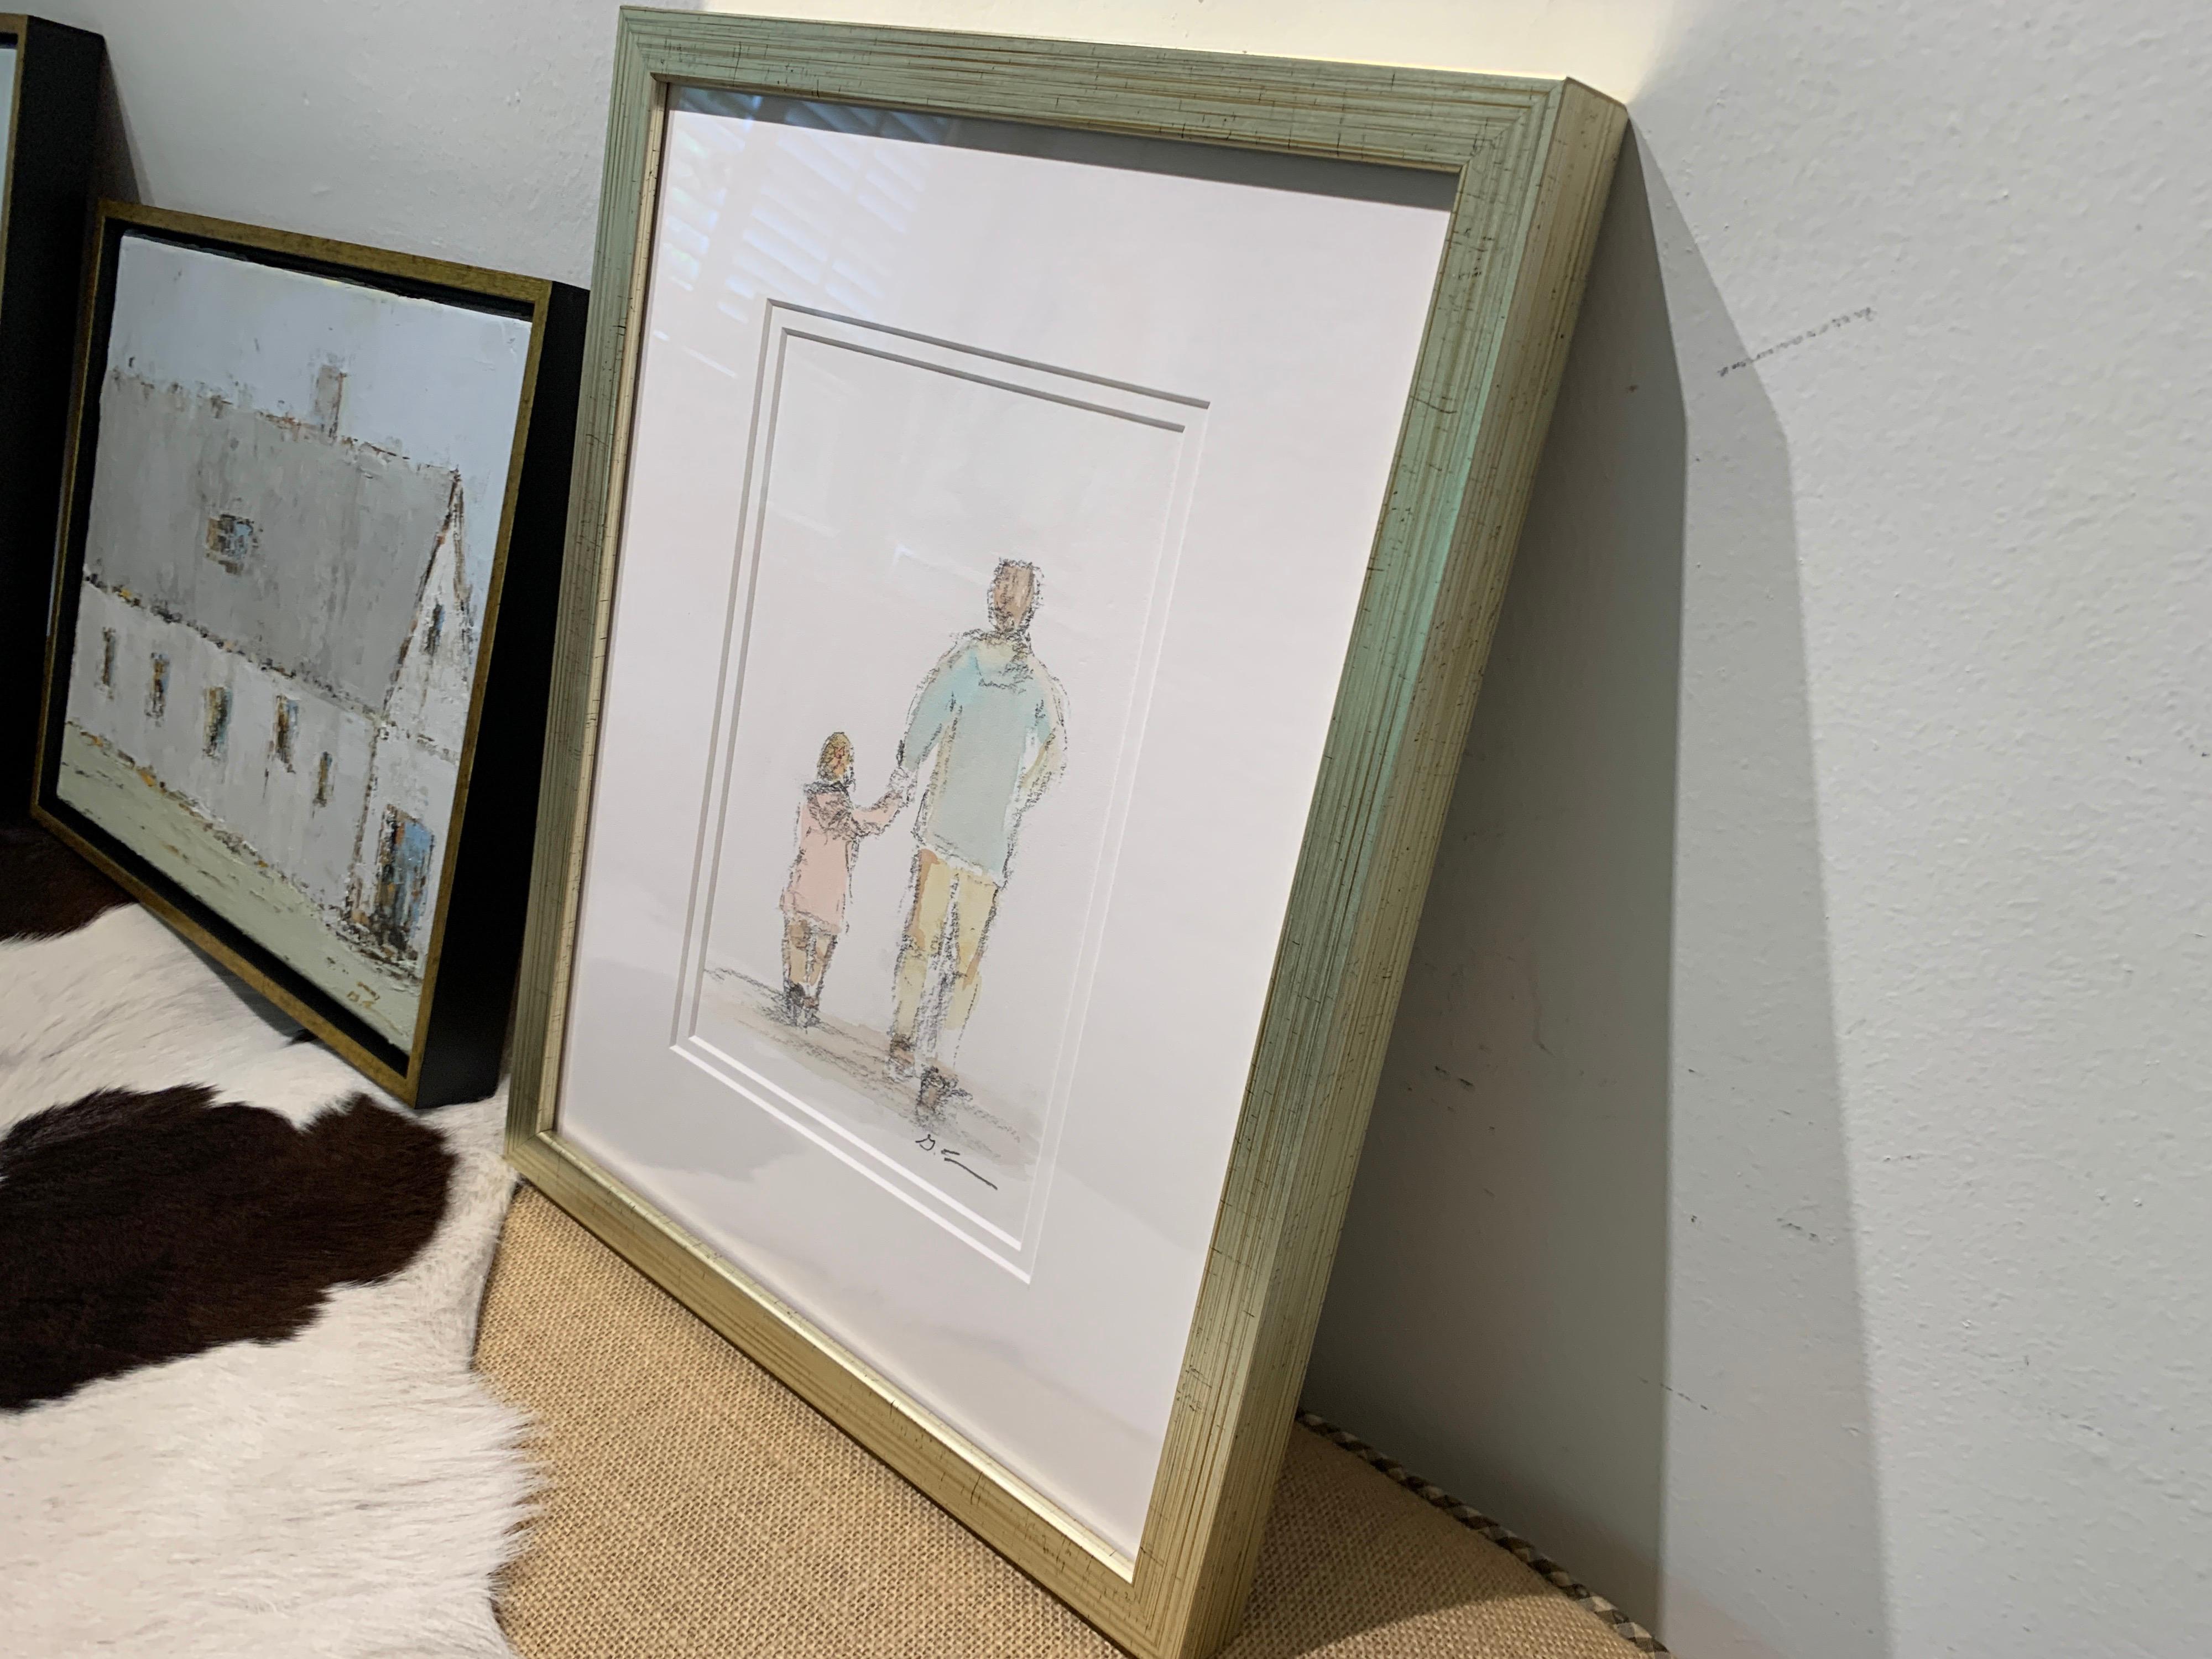 'Daddy's Girl' is a petite framed mixed media on paper Impressionist painting created by American artist Geri Eubanks in 2020. Featuring a soft palette made of blue, pink, brown, grey, off-white and black tones, this small figurative painting